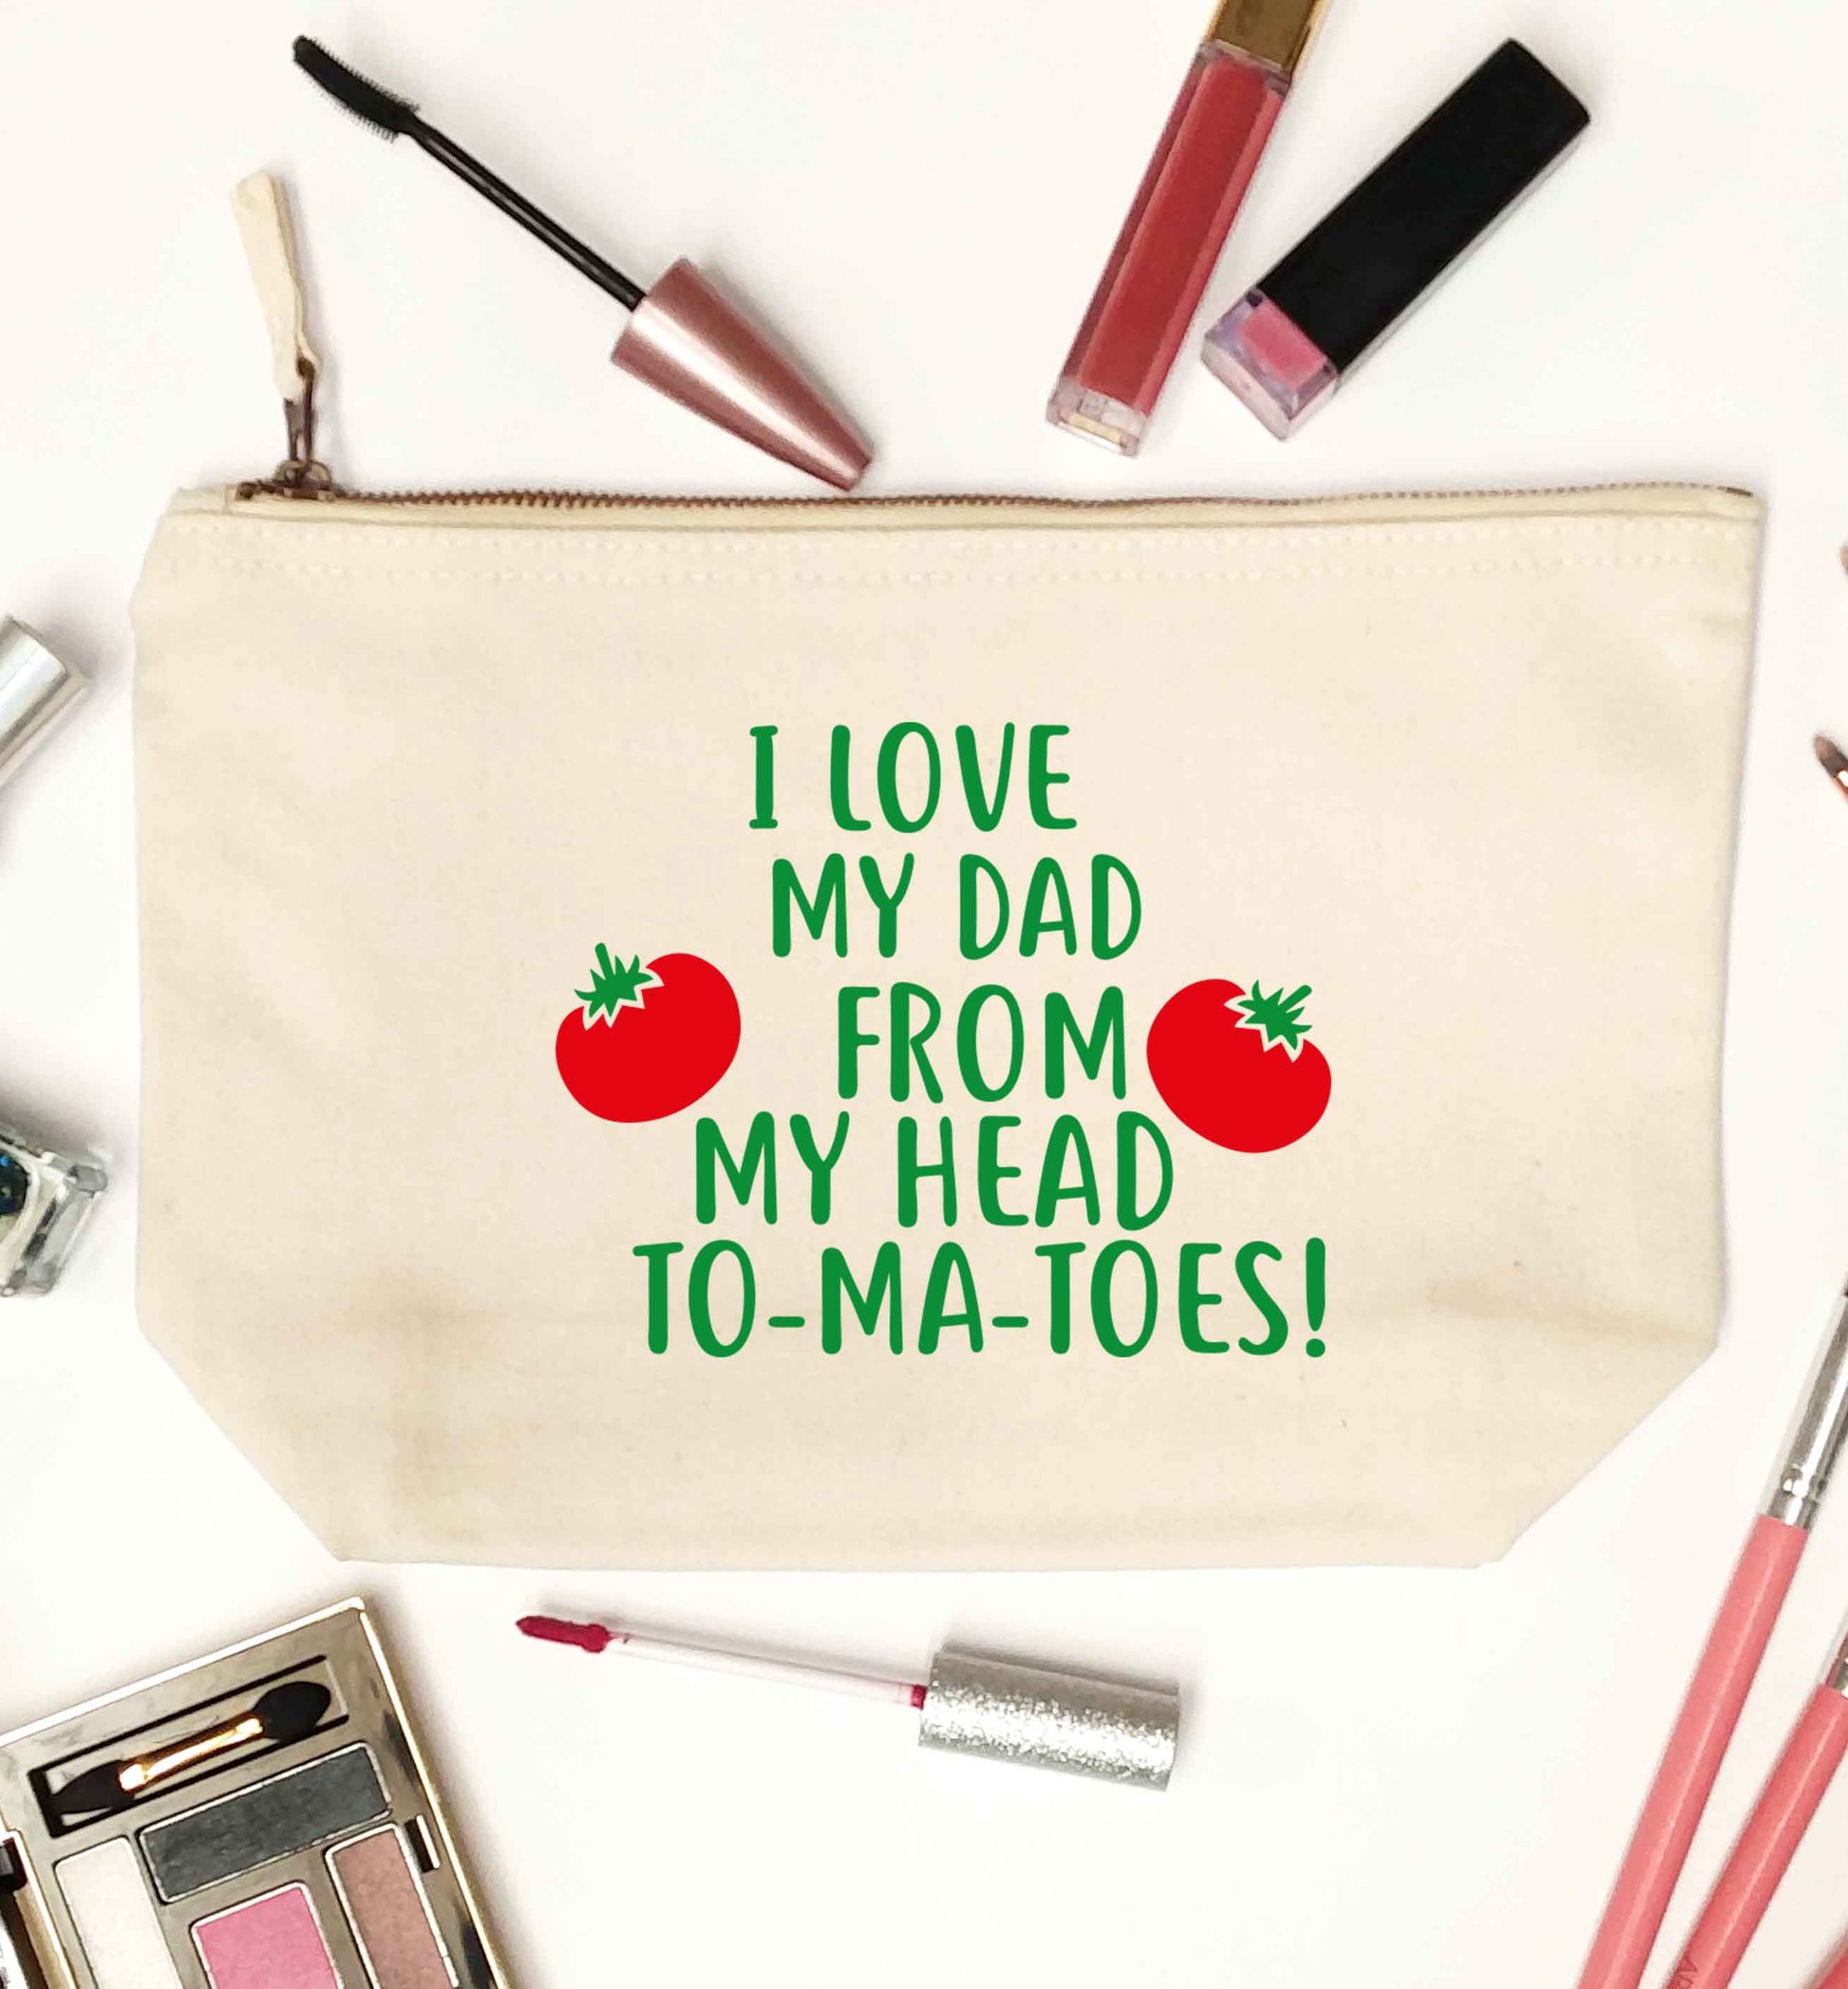 I love my dad from my head to-ma-toes natural makeup bag